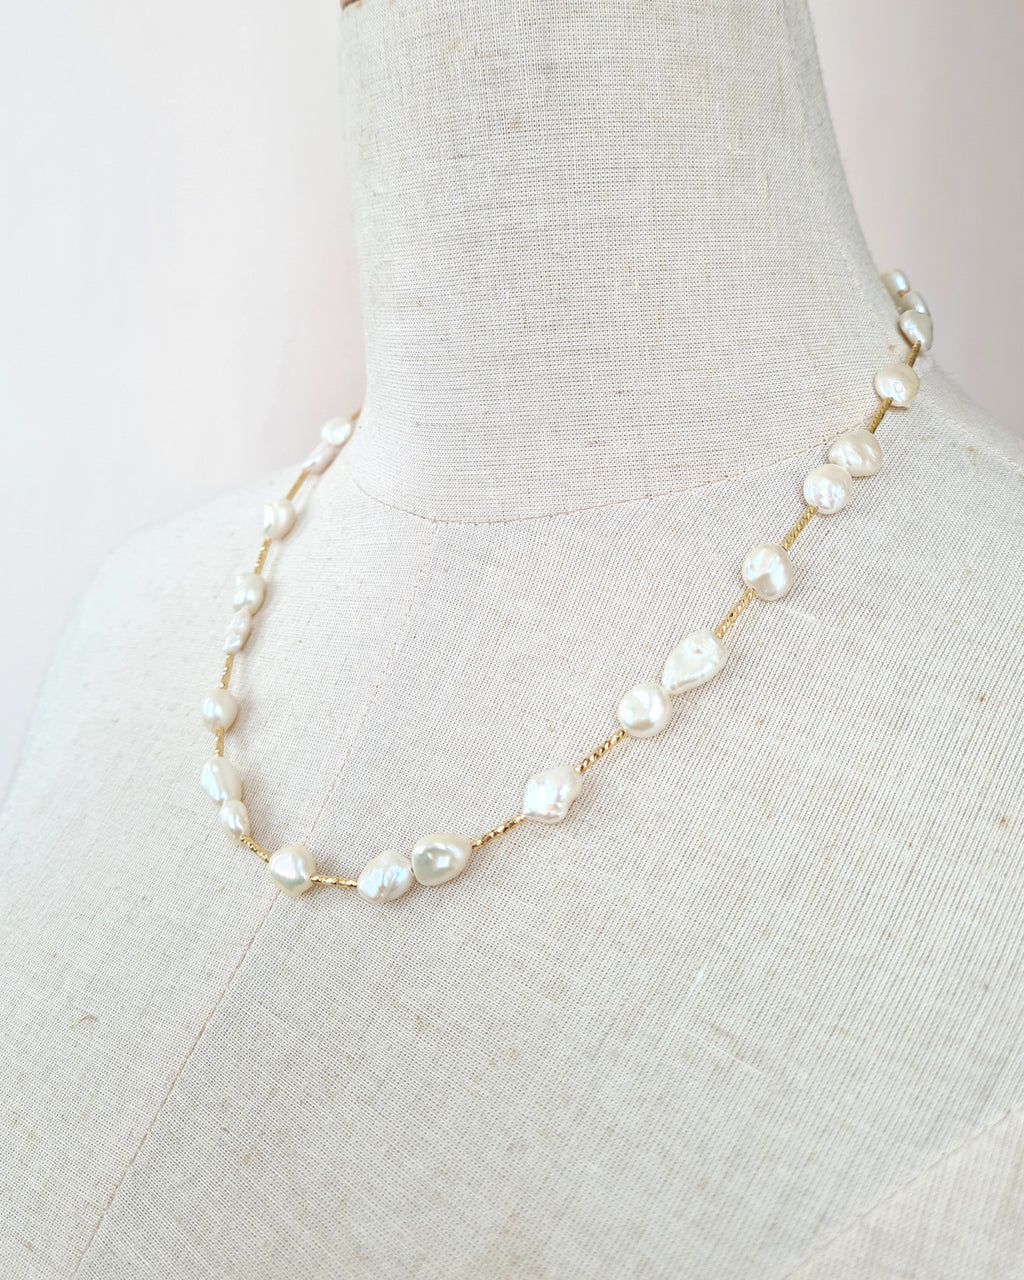 Keshi Pearl Necklace with Versatile Clasp Choker Y-drop Necklace Anniversary Gifts for Her